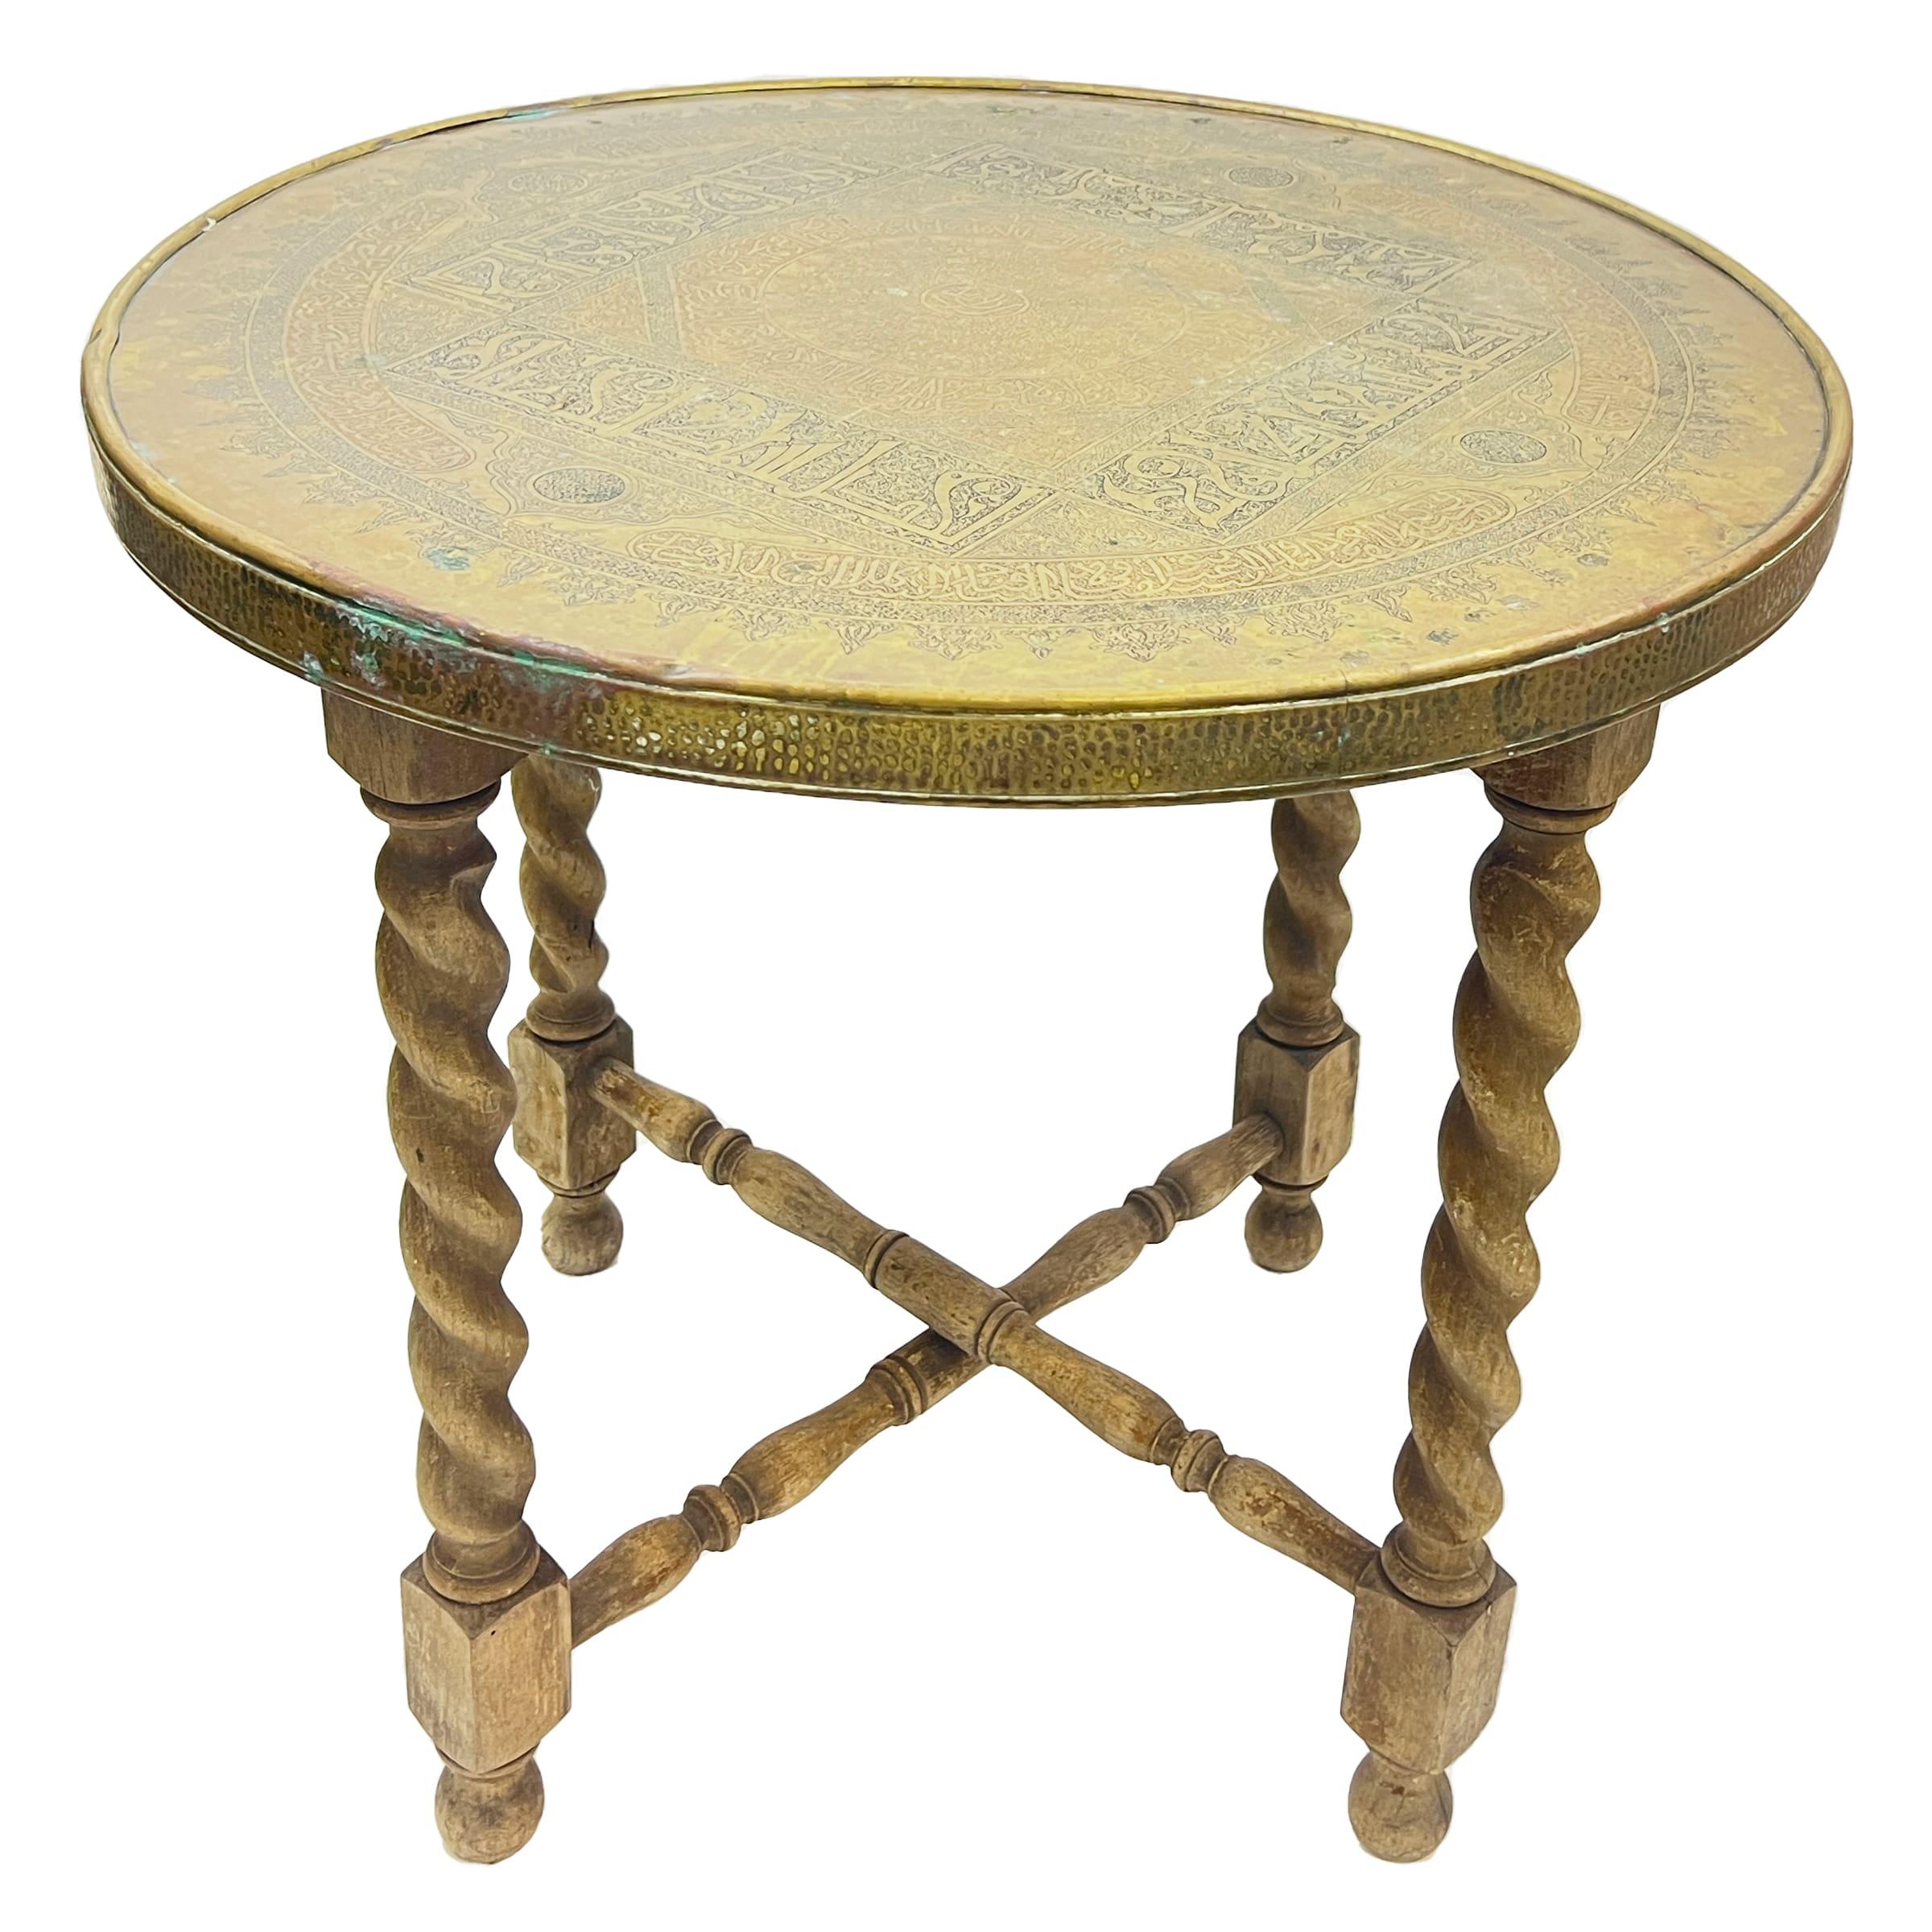 Late 19th century heavily carved Islamic calligraphy and Mamluk motifs brass centre table, the brass top of a round shape raised on a four spiral columns wooden base. Egypt or Syria.
 